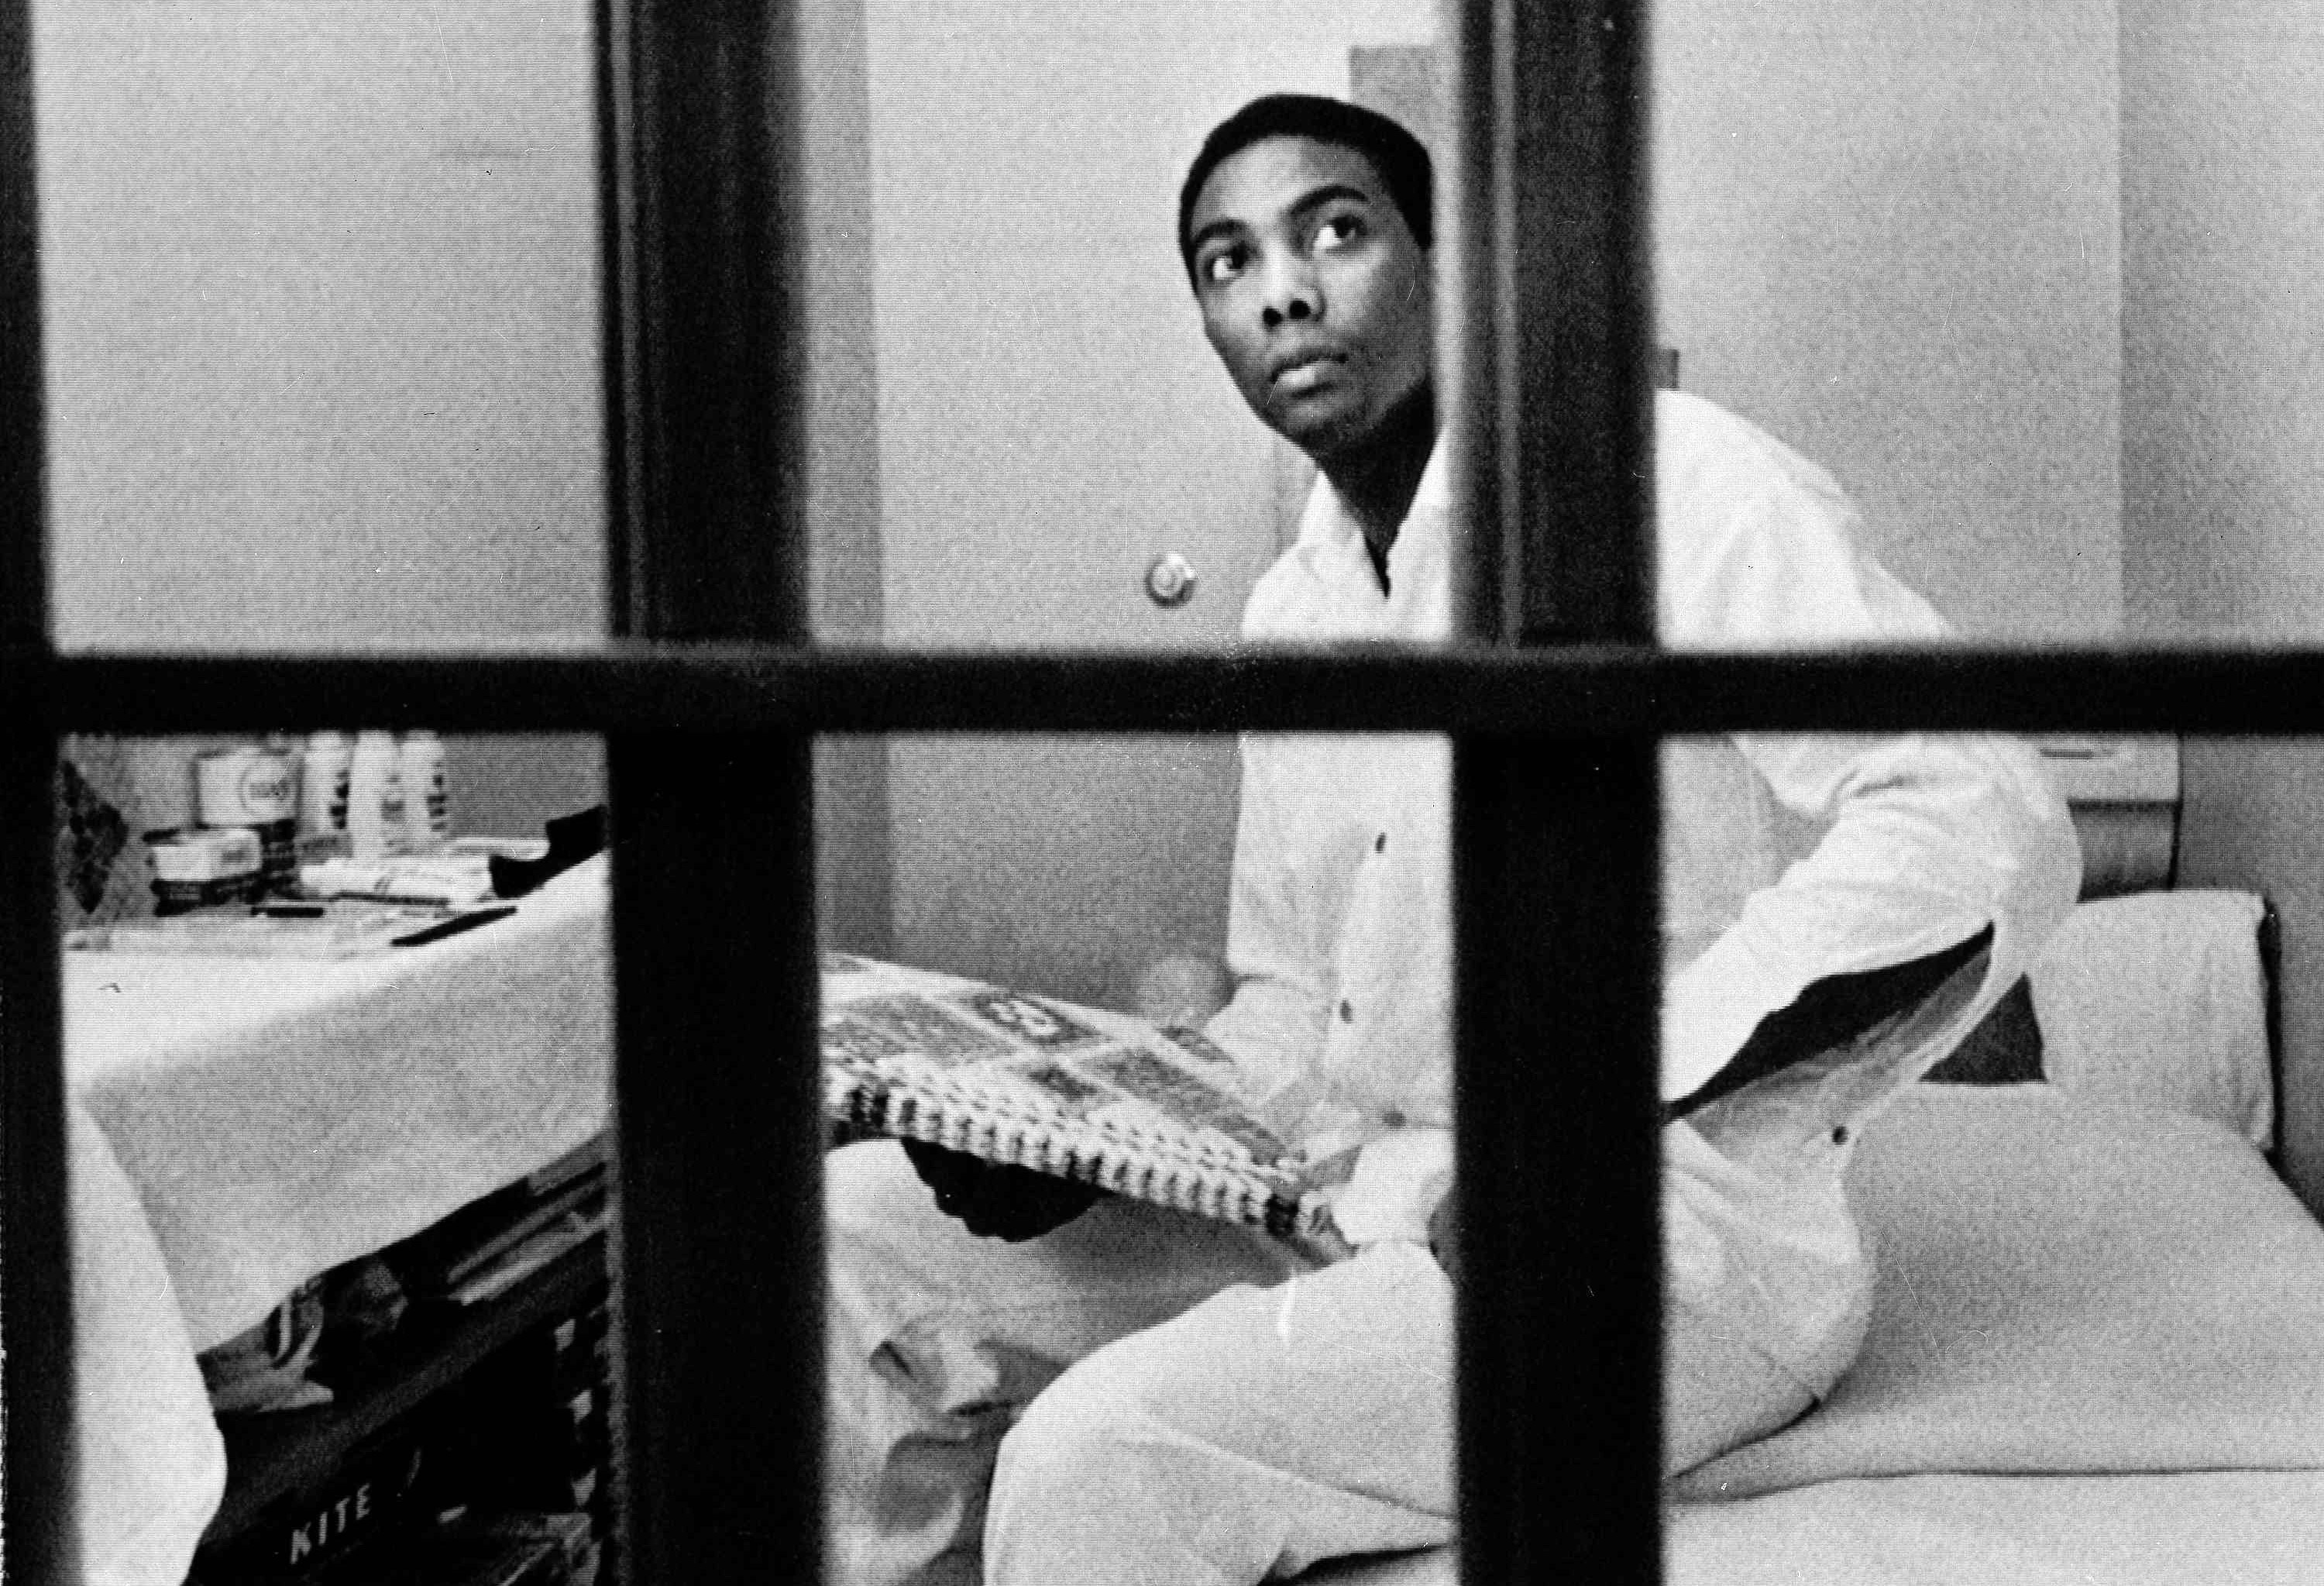 Elmer Branch, 19, under sentence of death for the non-fatal assault on an elderly white woman, was one of three condemned inmates in the country whose death sentences were reversed immediately by the Supreme Court decision, March 5, 1972, Huntsville, Texas. Branch is shown here in his cell on death row in the Ellis Unit of the Texas Department of Corrections. (AP Photo/Ed Kolenovsky)